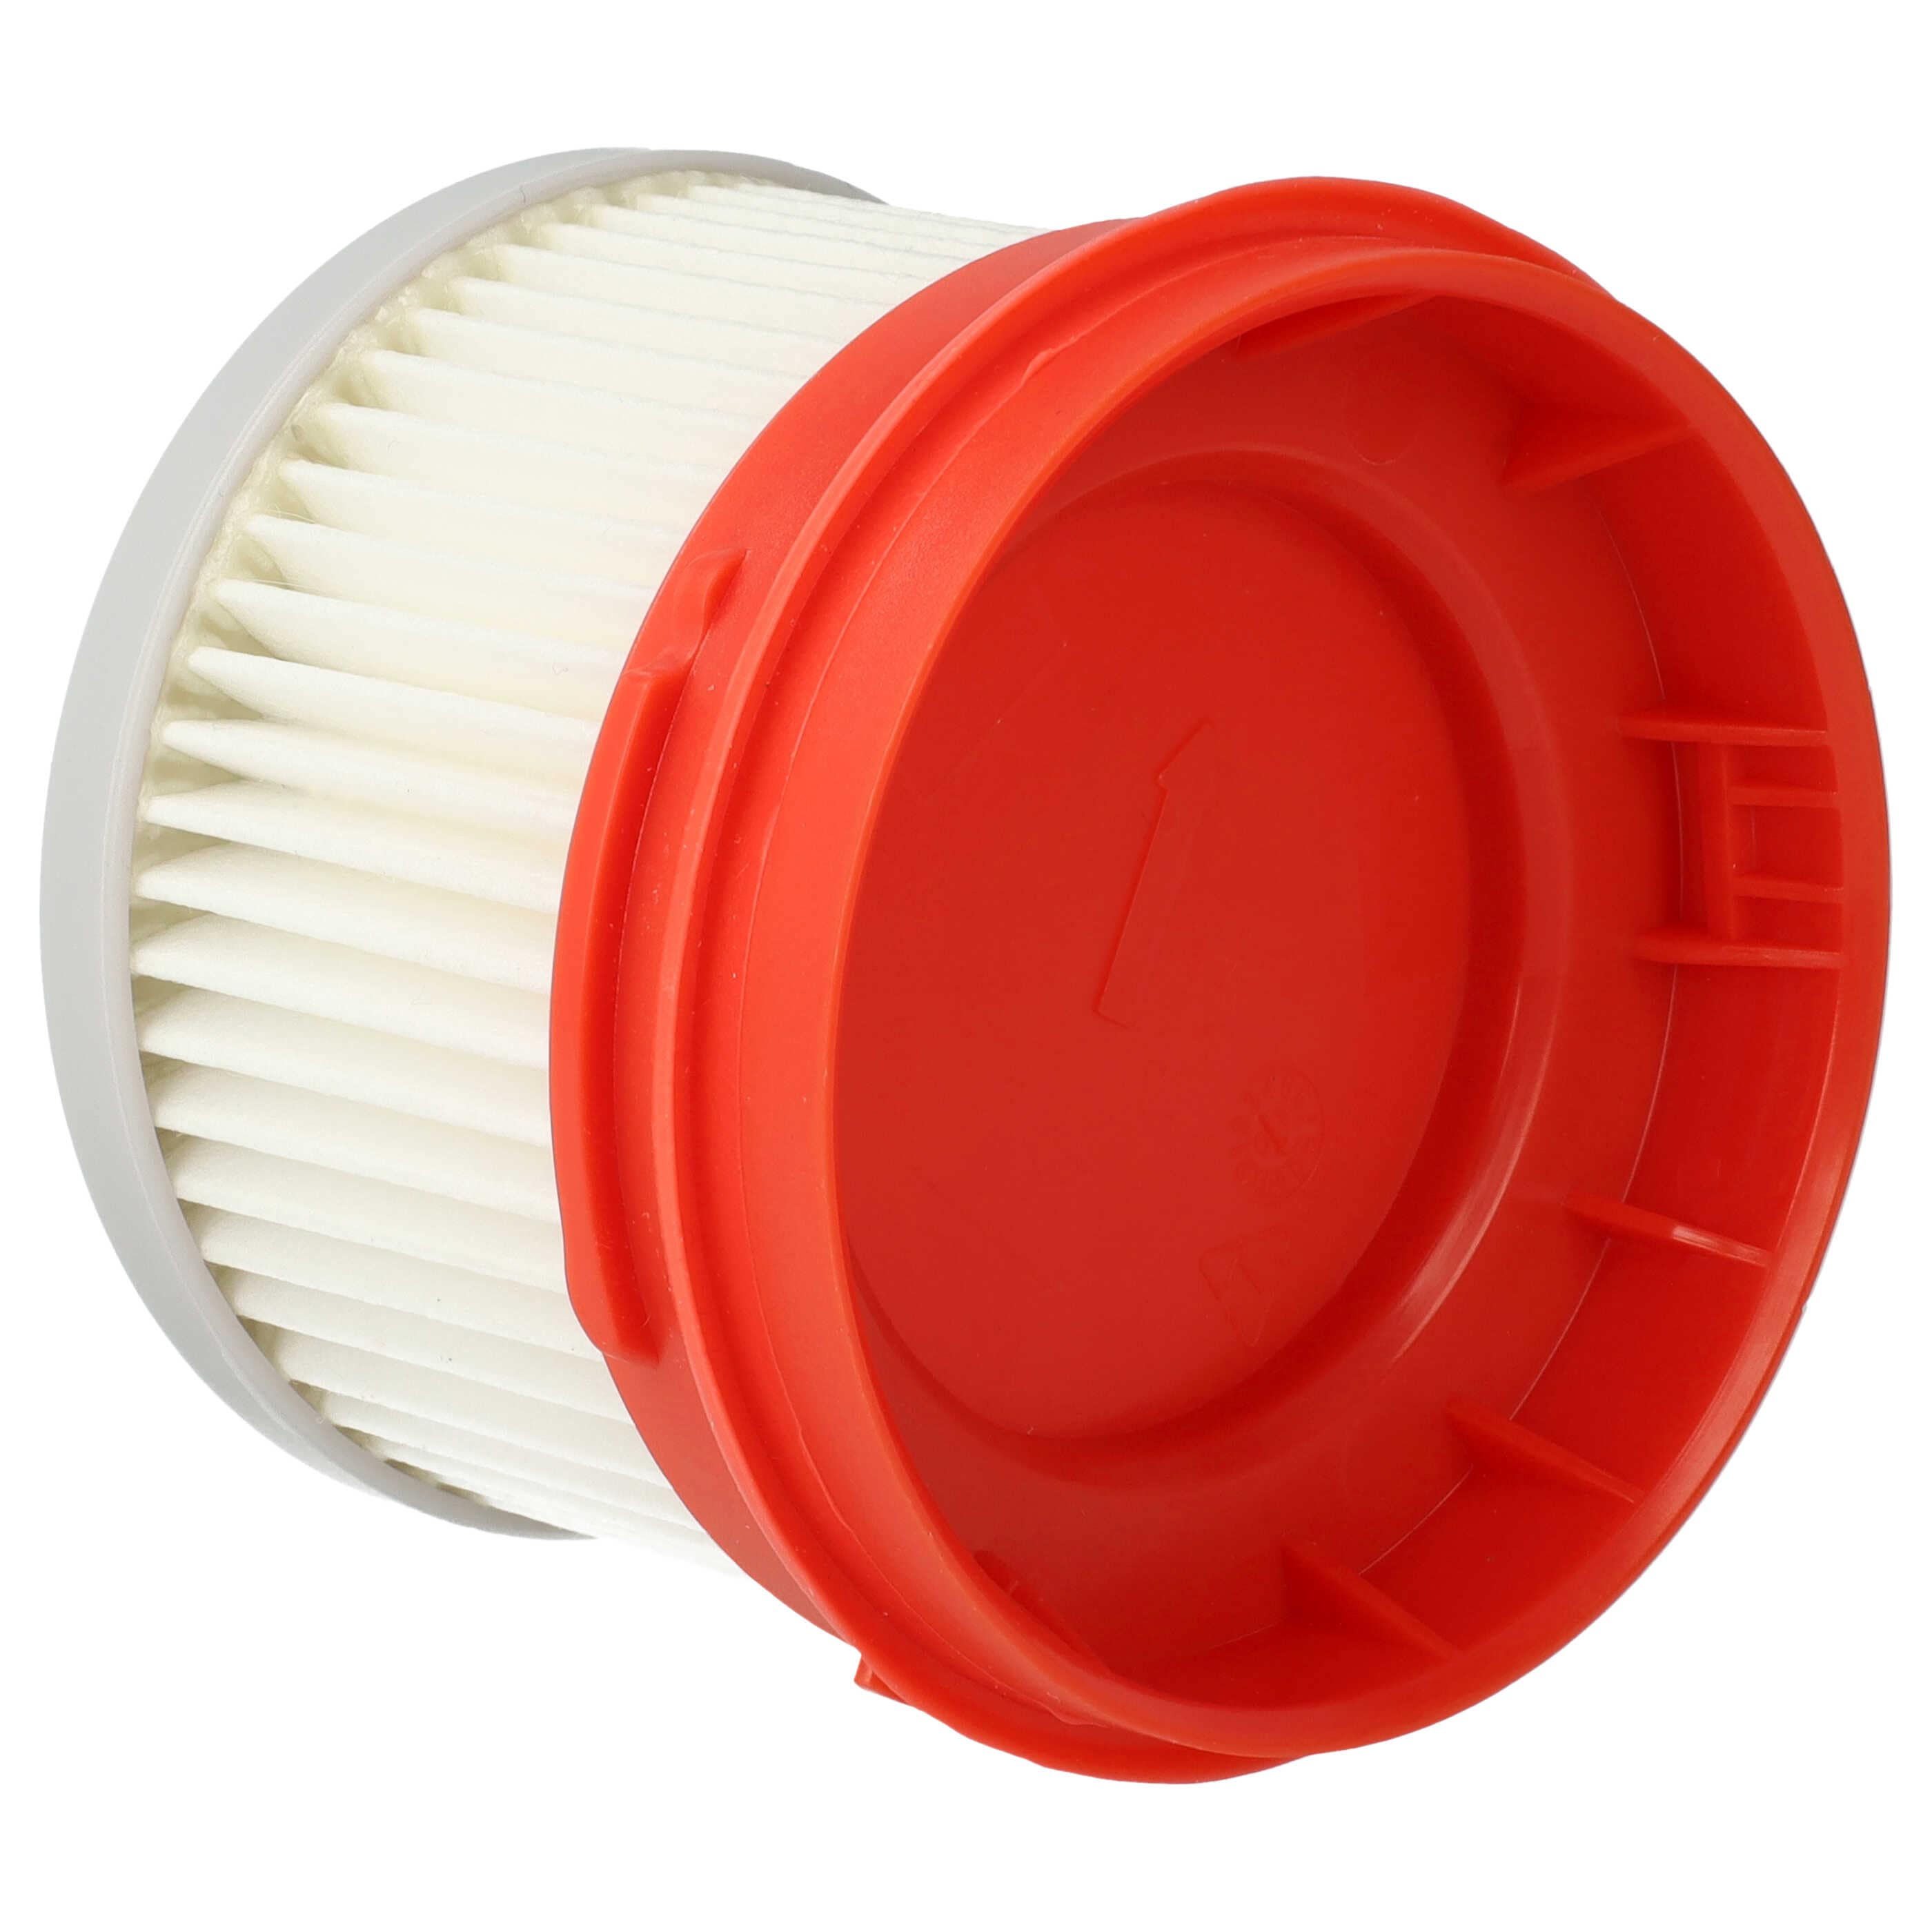 1x foam filter suitable for Dreame V10 Vacuum Cleaner